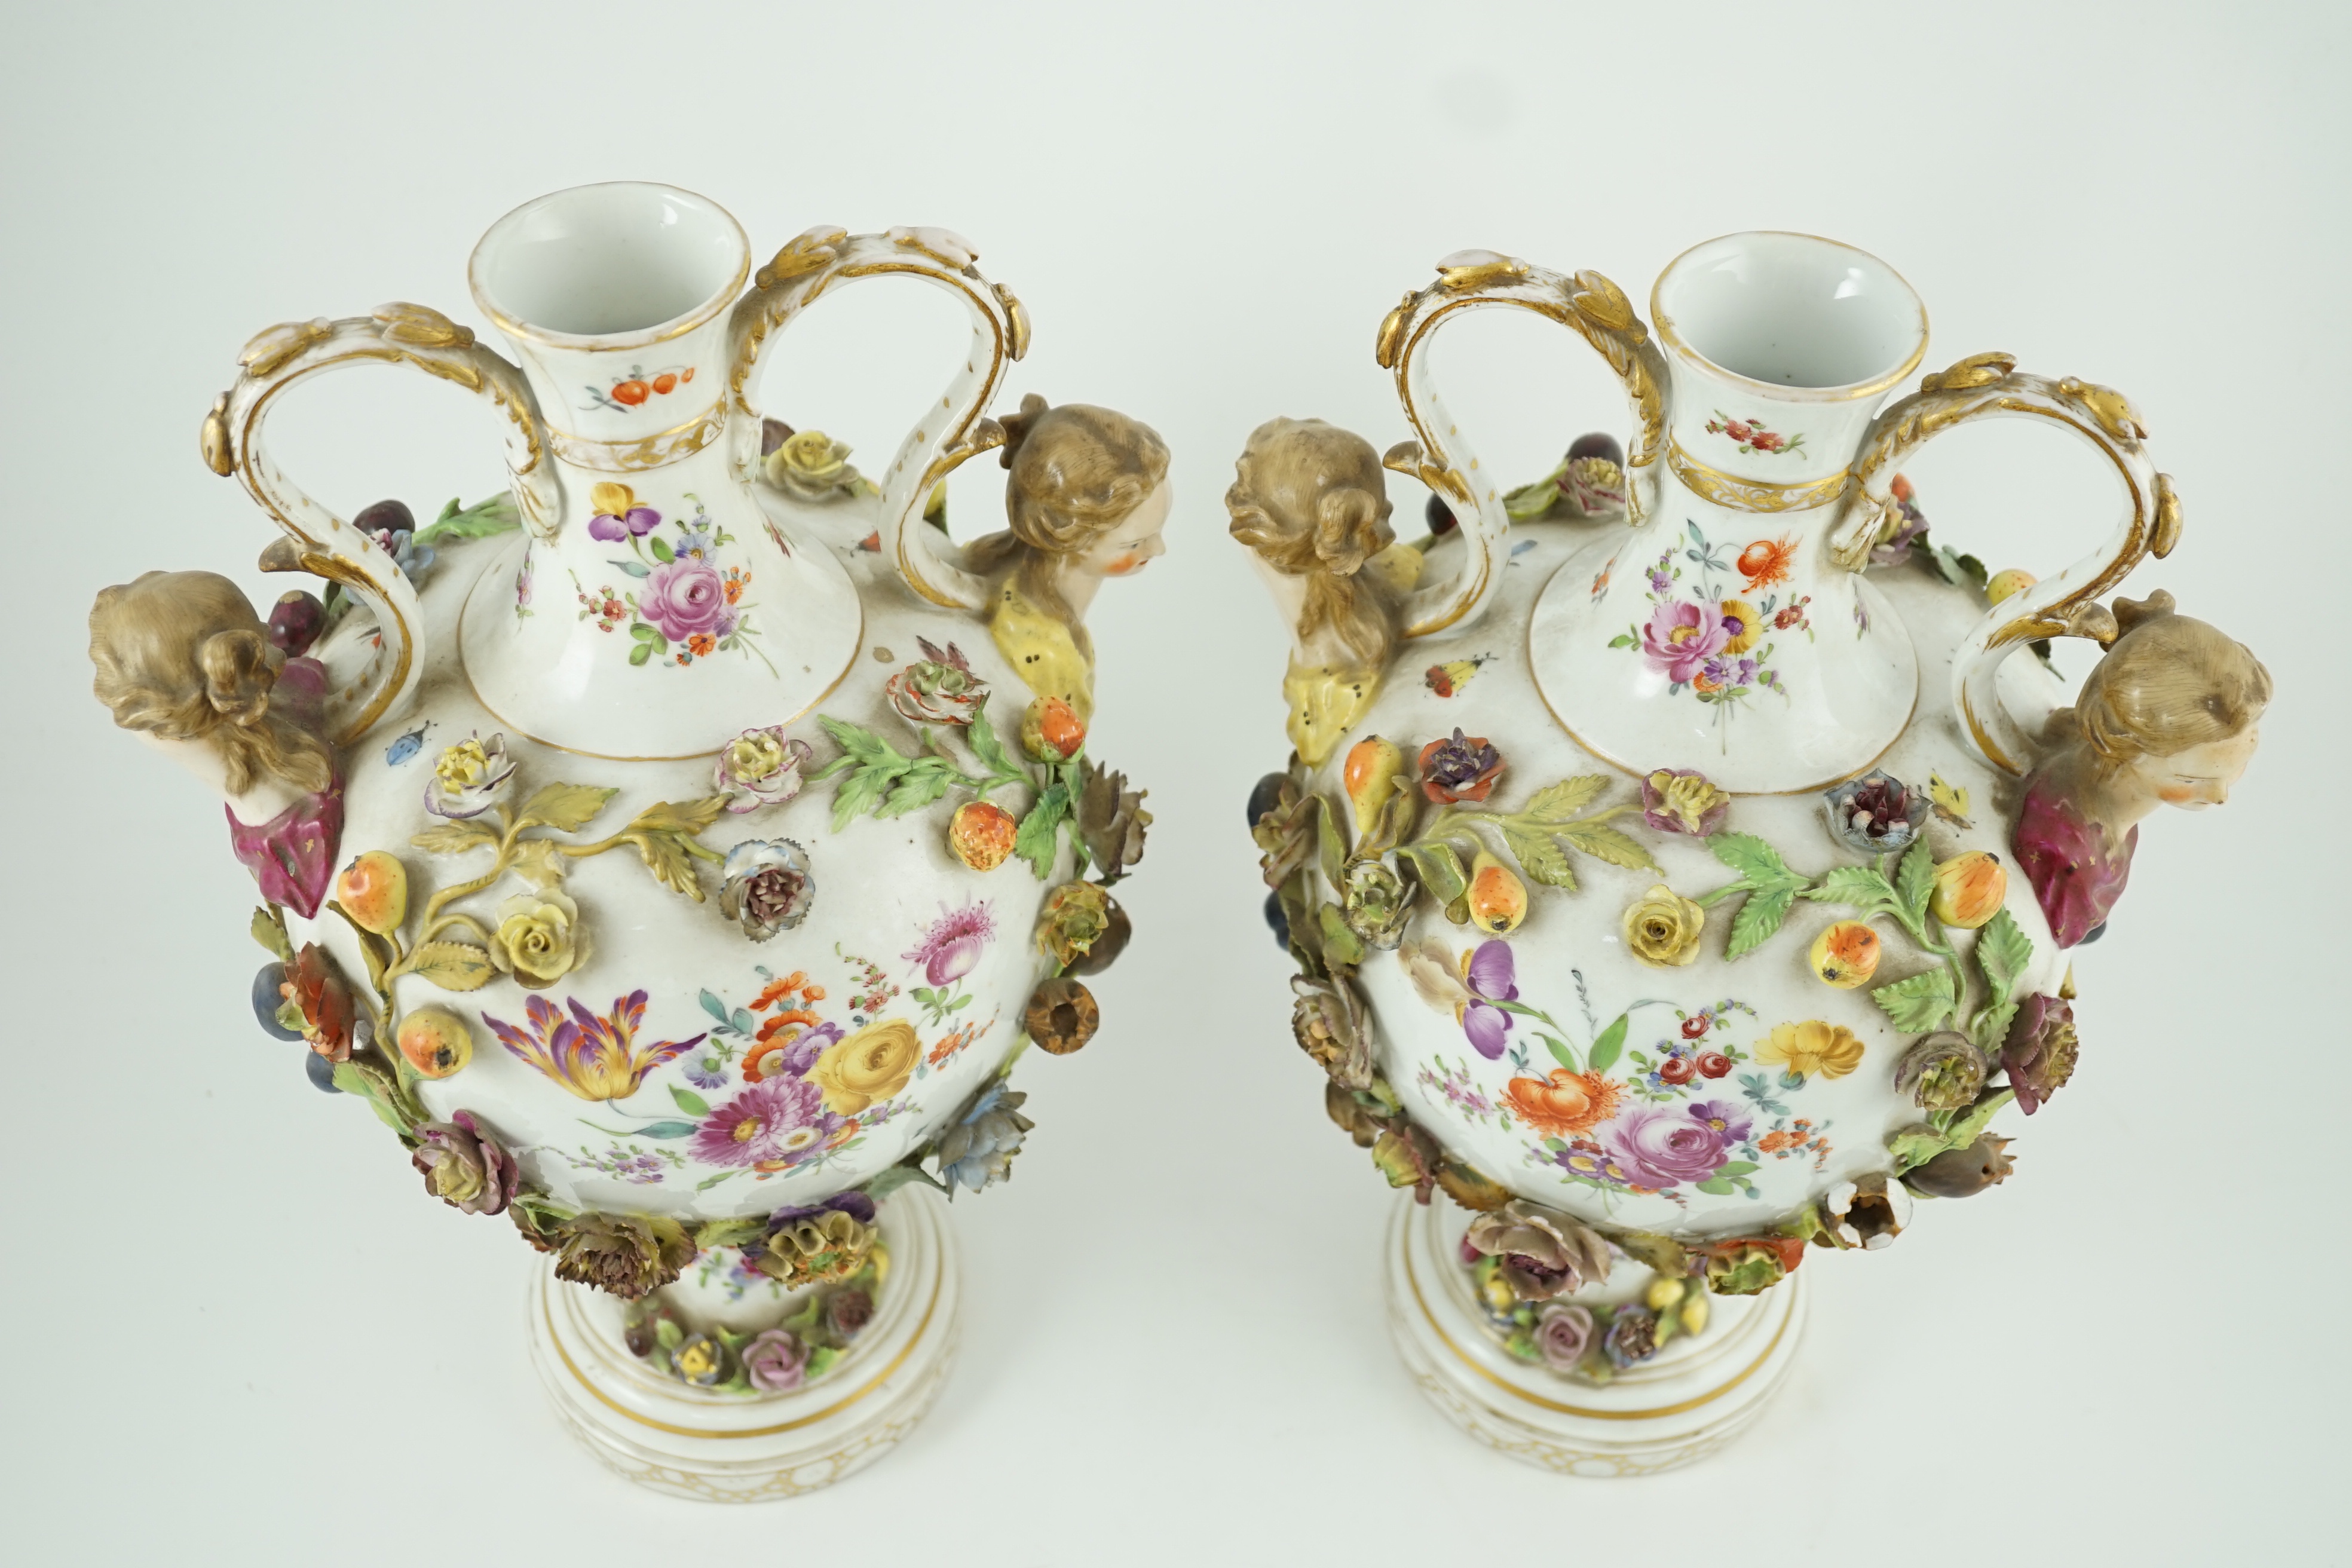 A pair of Potschappel porcelain vases and cover, late 19th century, 41cm high, slight damage